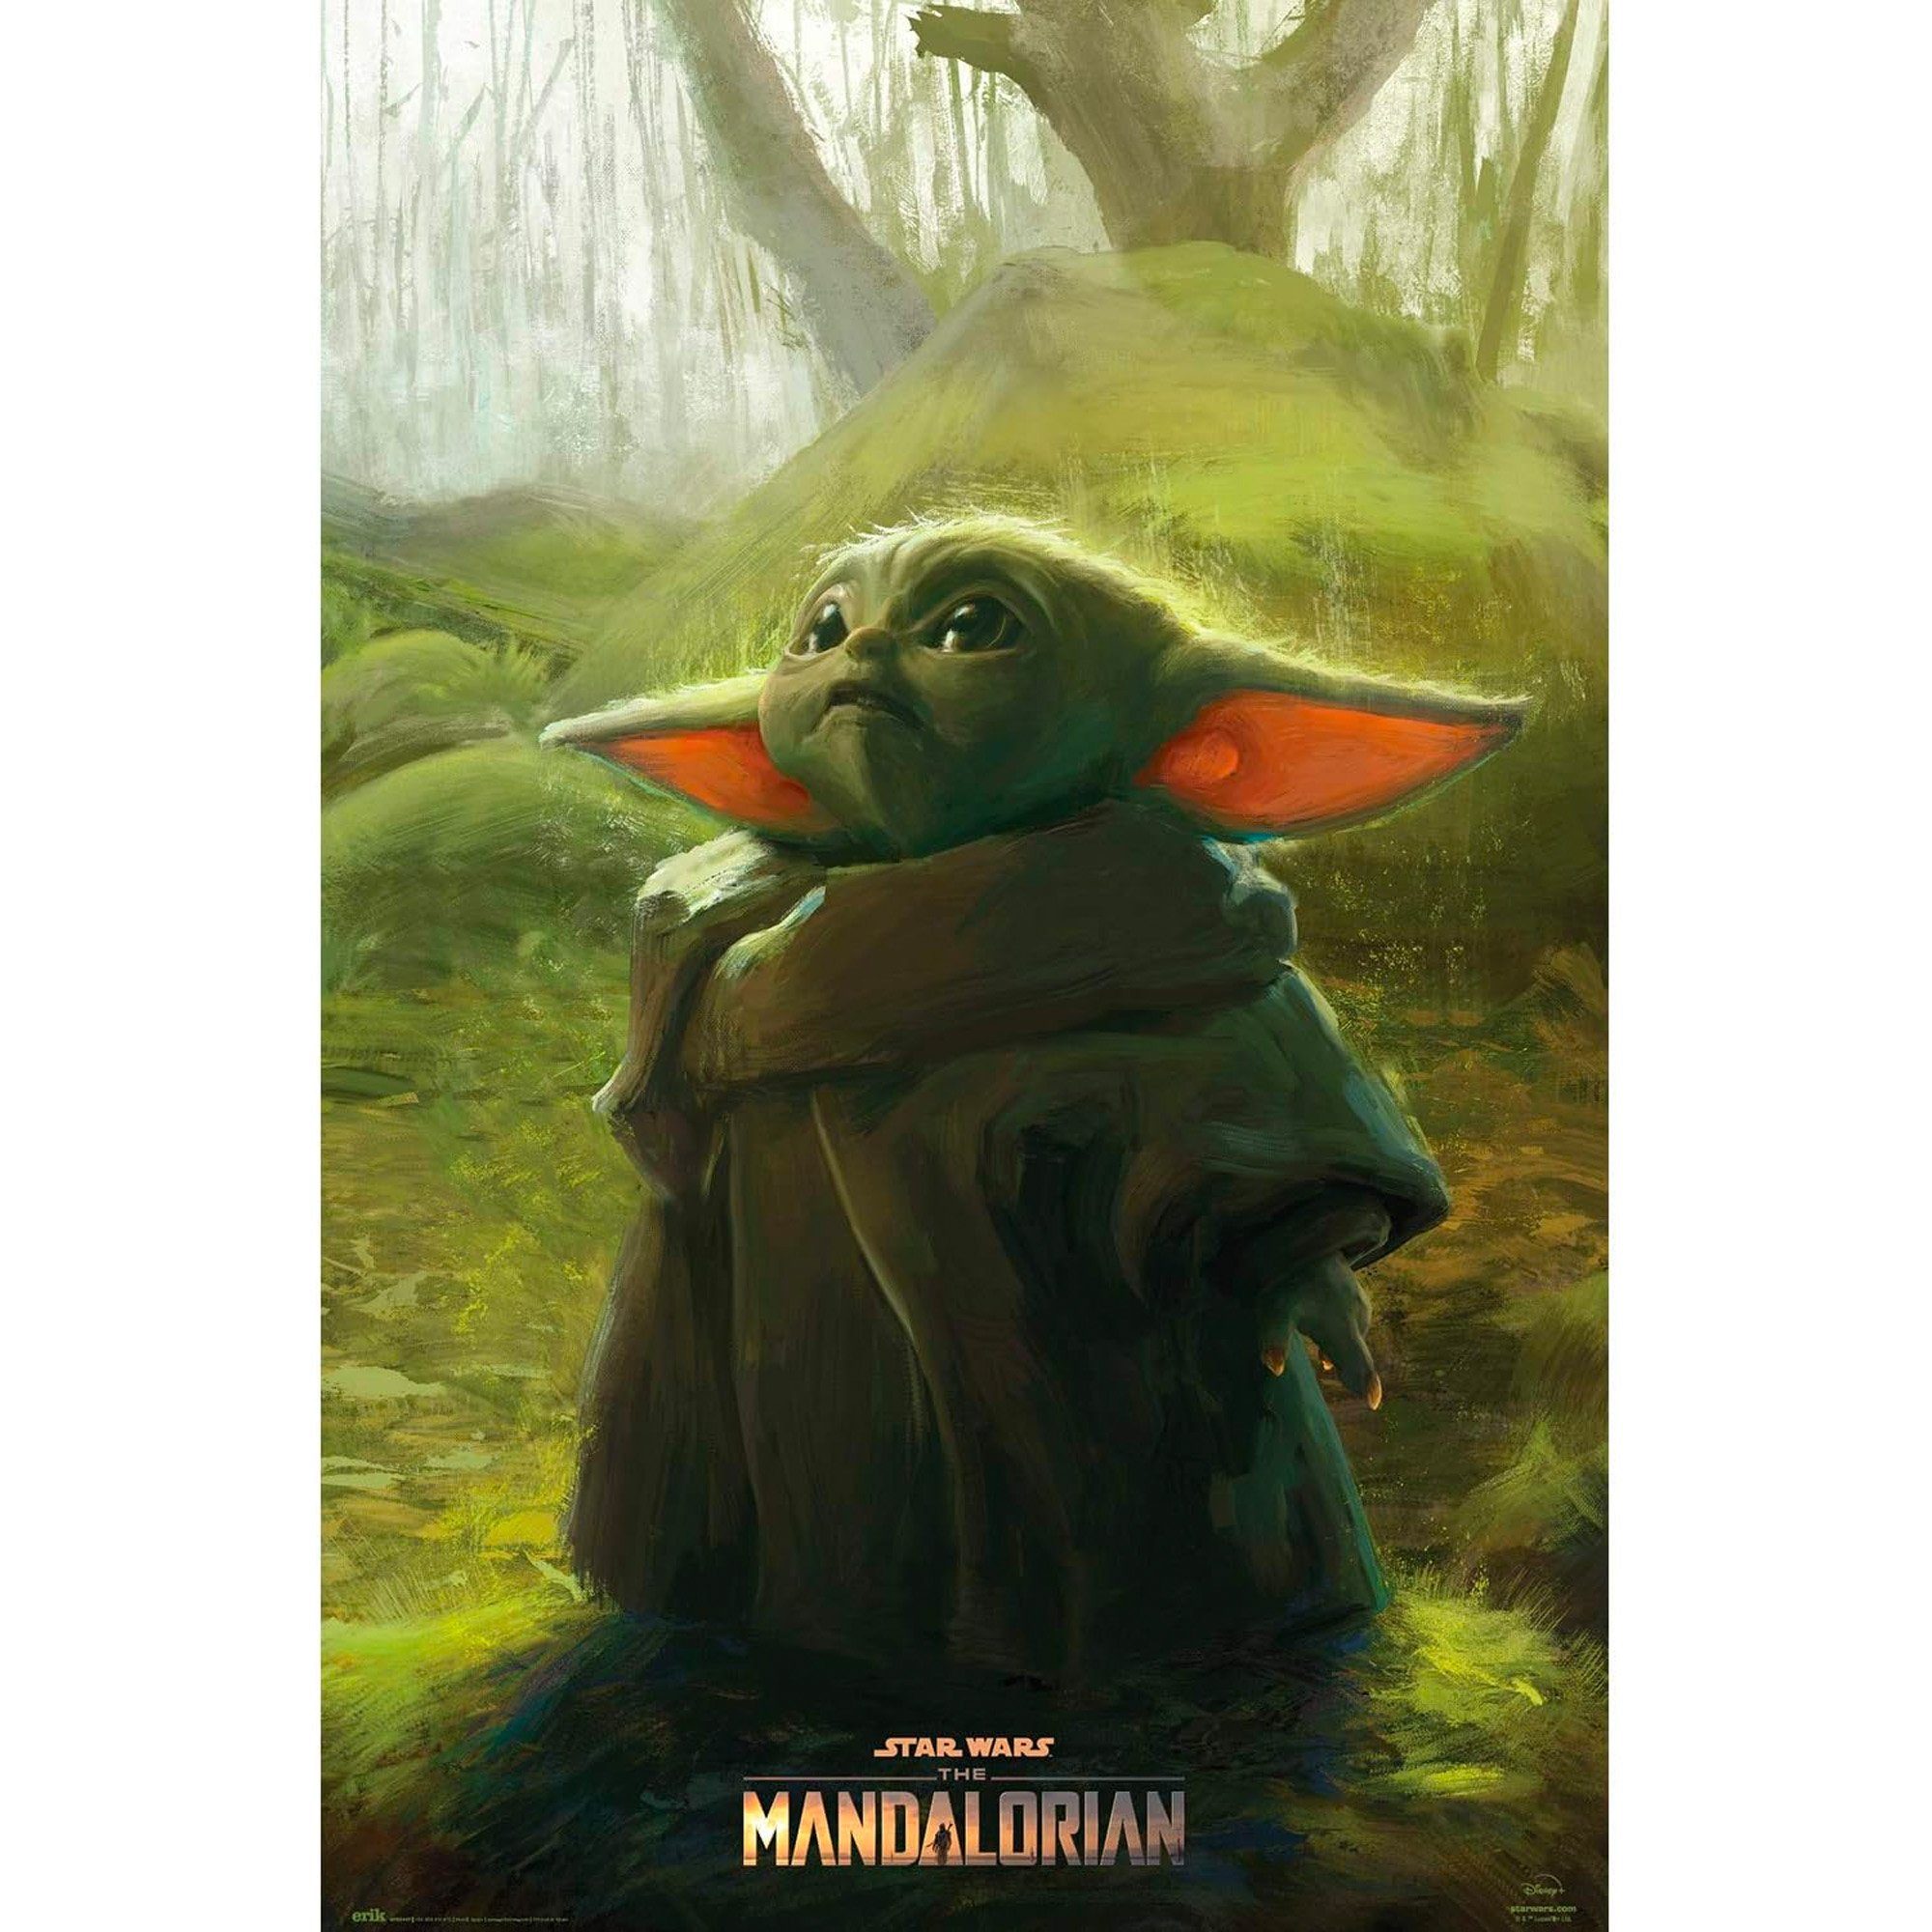 Hole in the Wall Poster The Child Art - Star Wars The Mandalorian, The Child Art